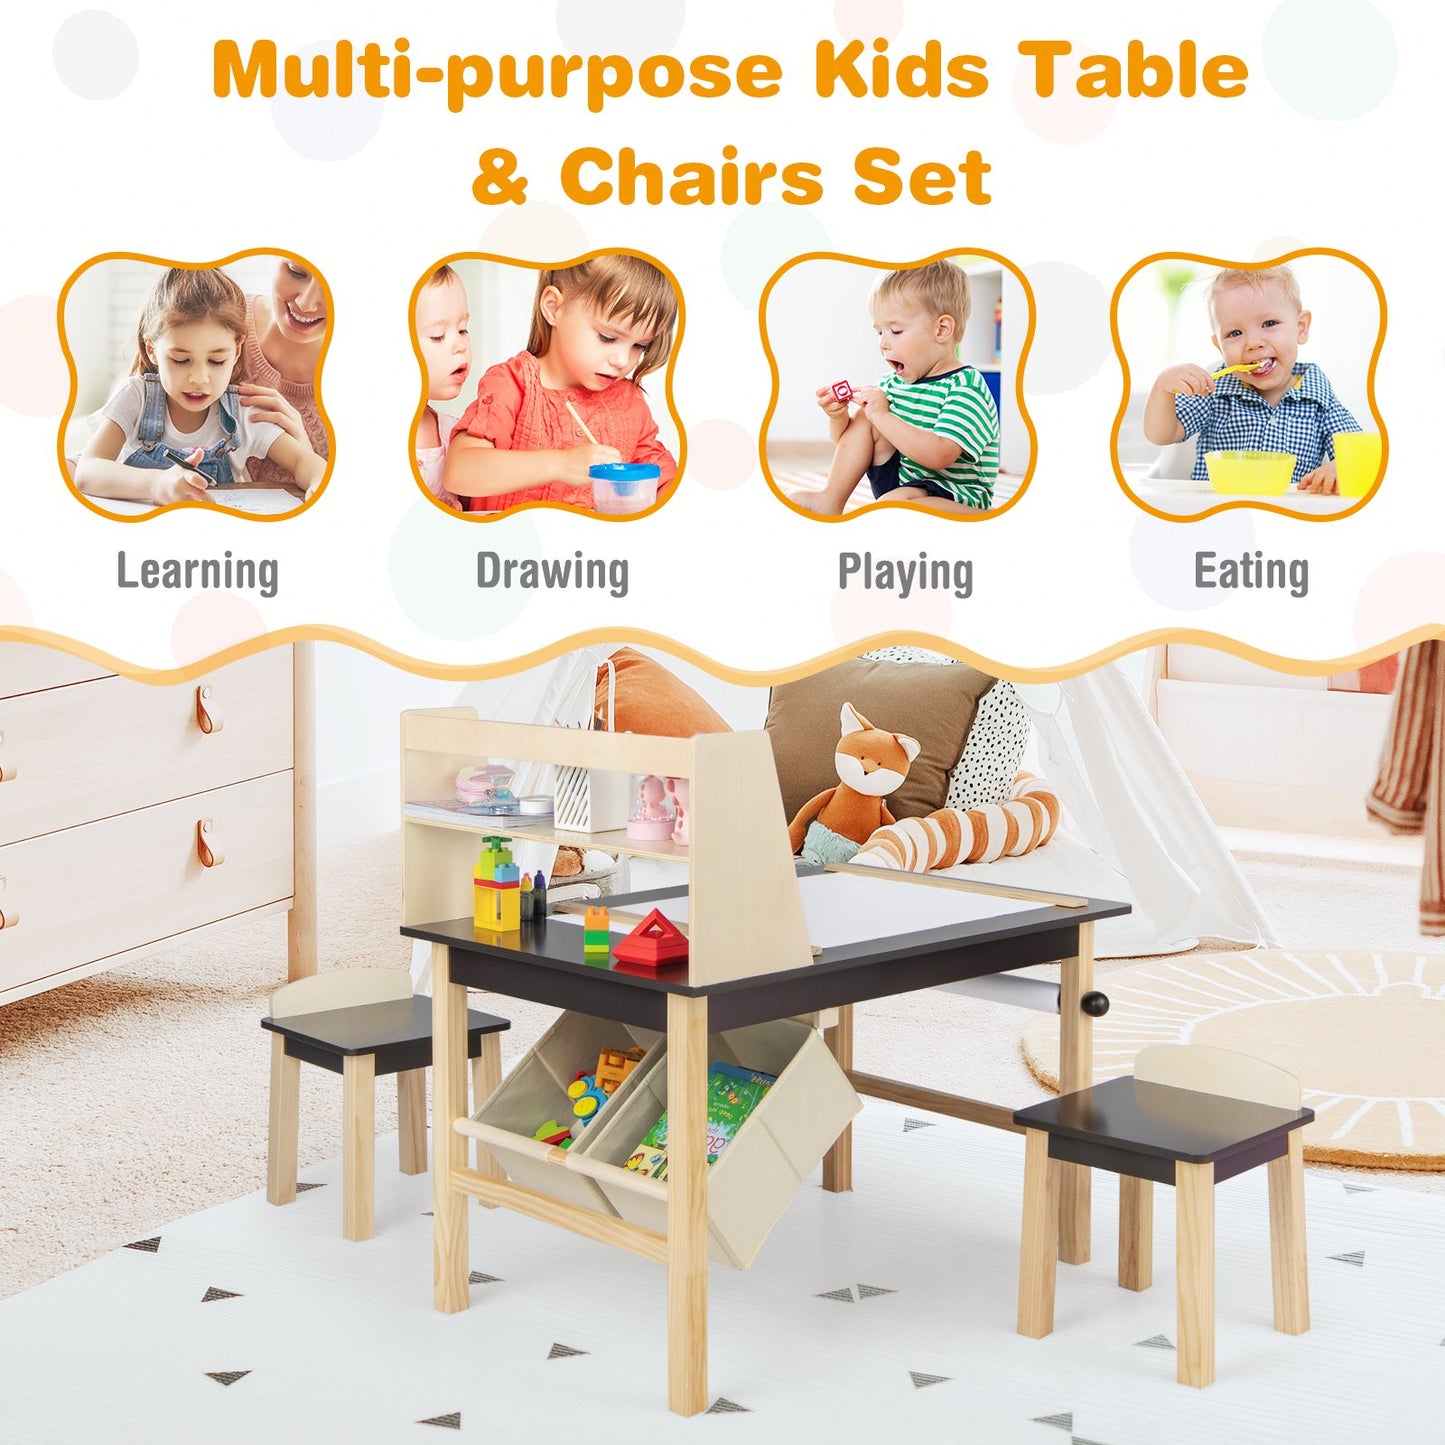 Kids Art Table and Chairs Set with Paper Roll and Storage Bins, Coffee